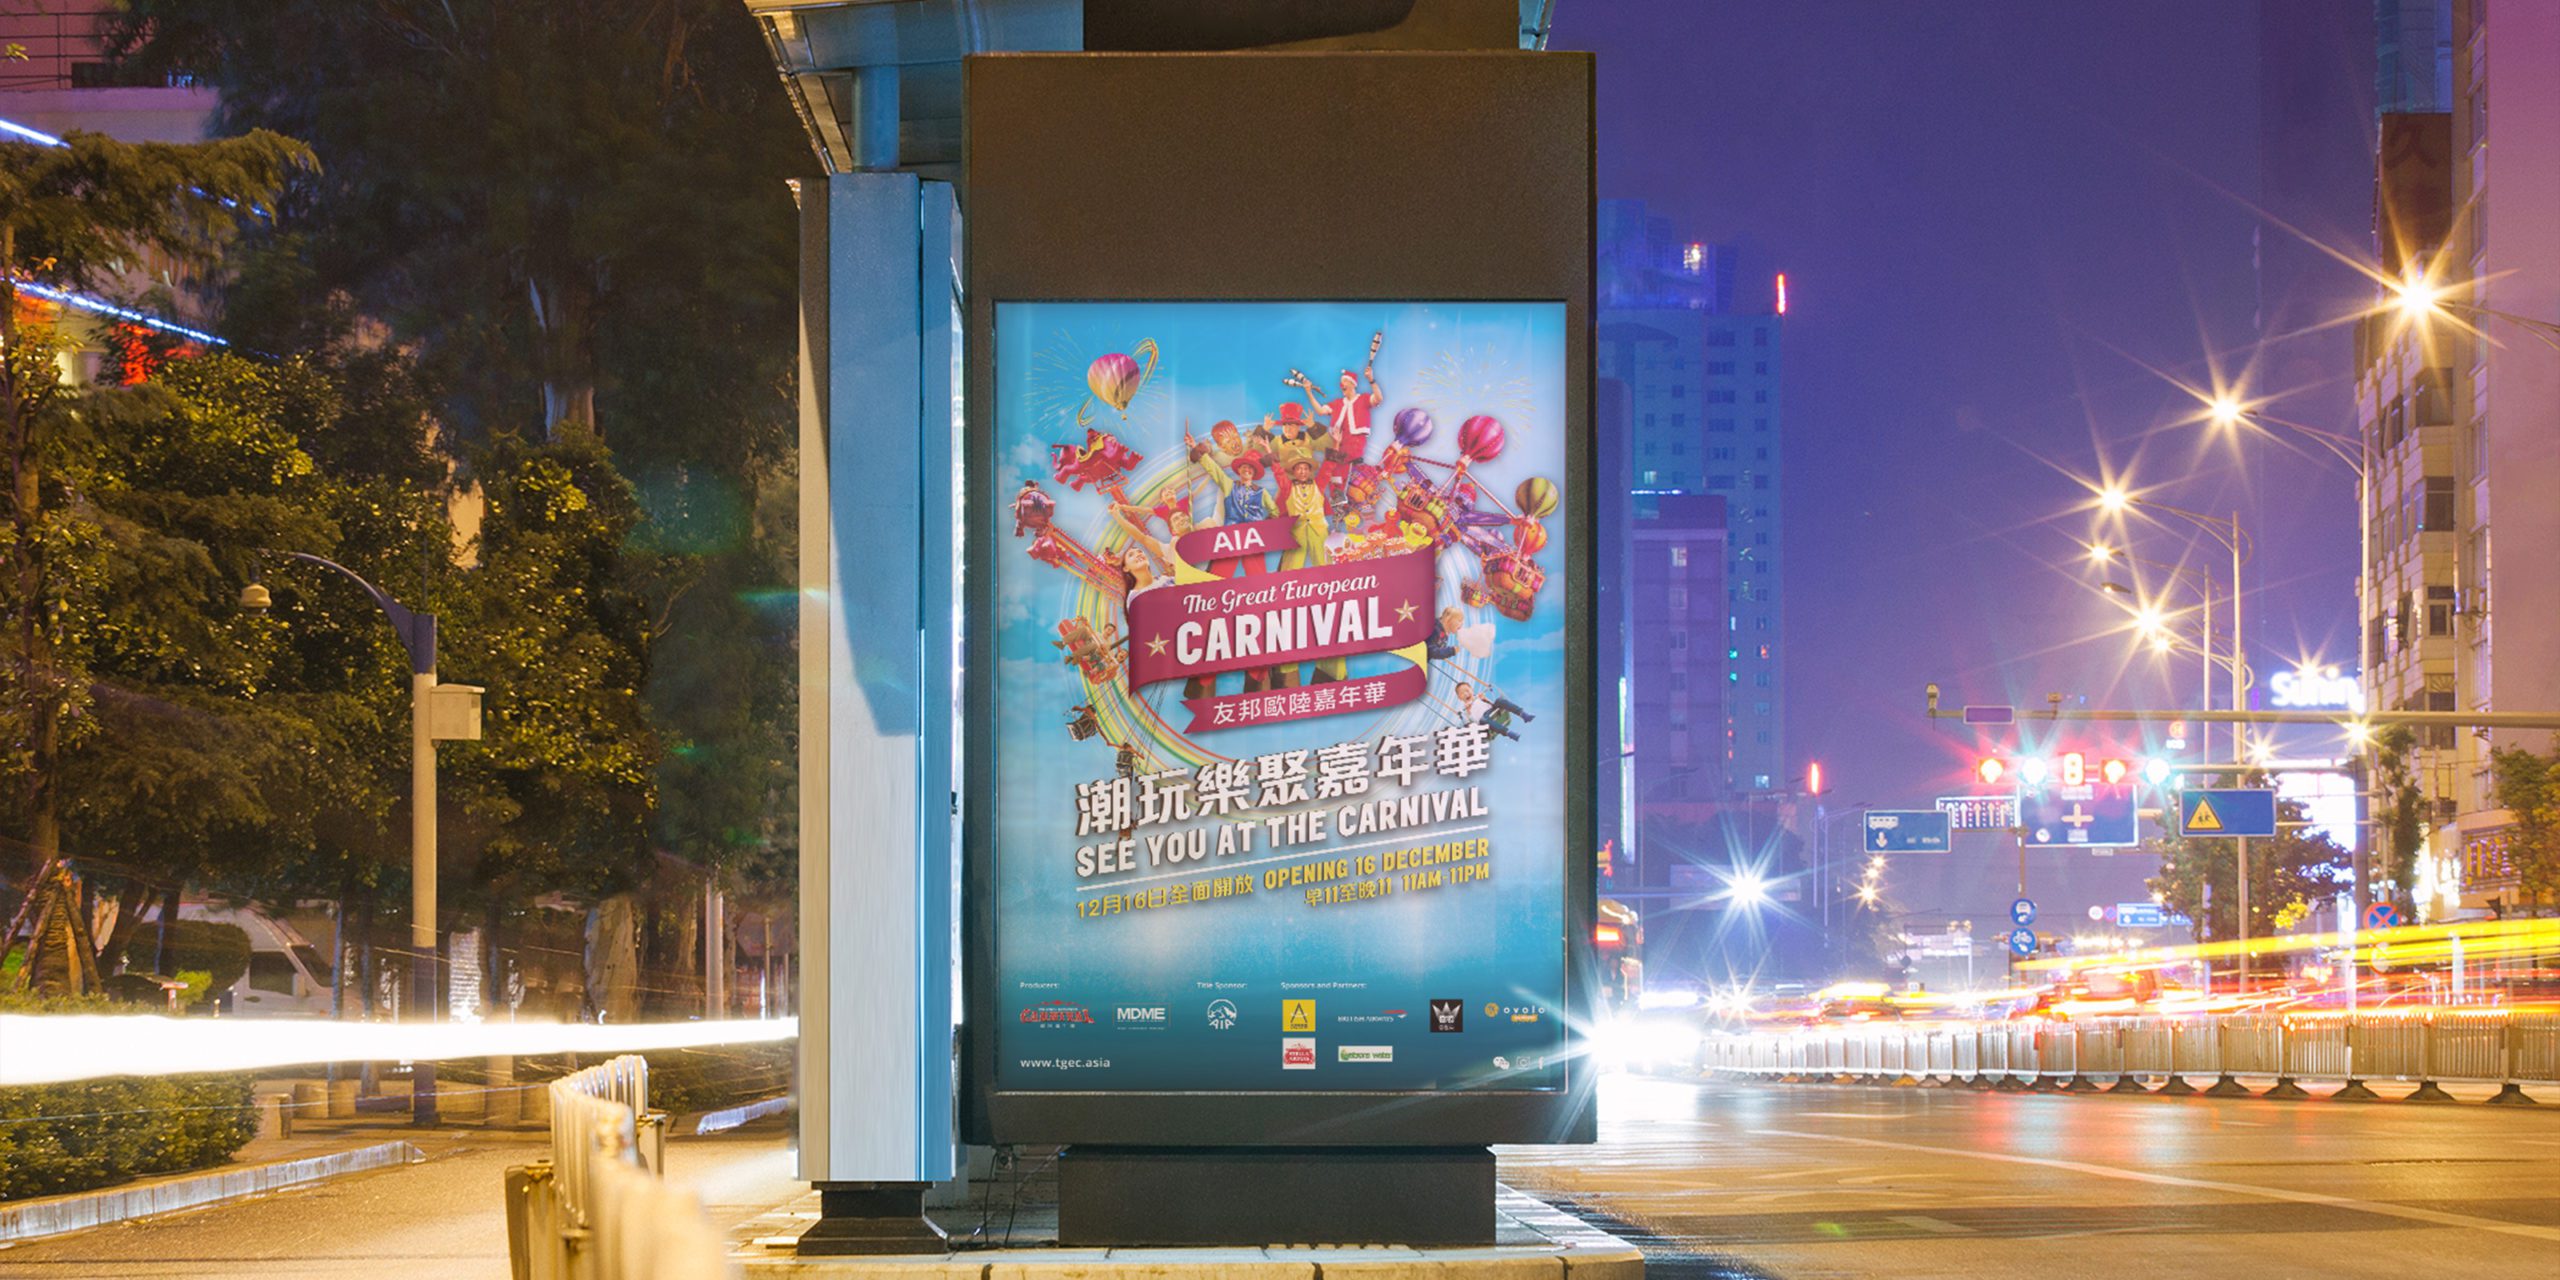 AIA Carnival Hong Kong Landscape Poster Design in bus stop